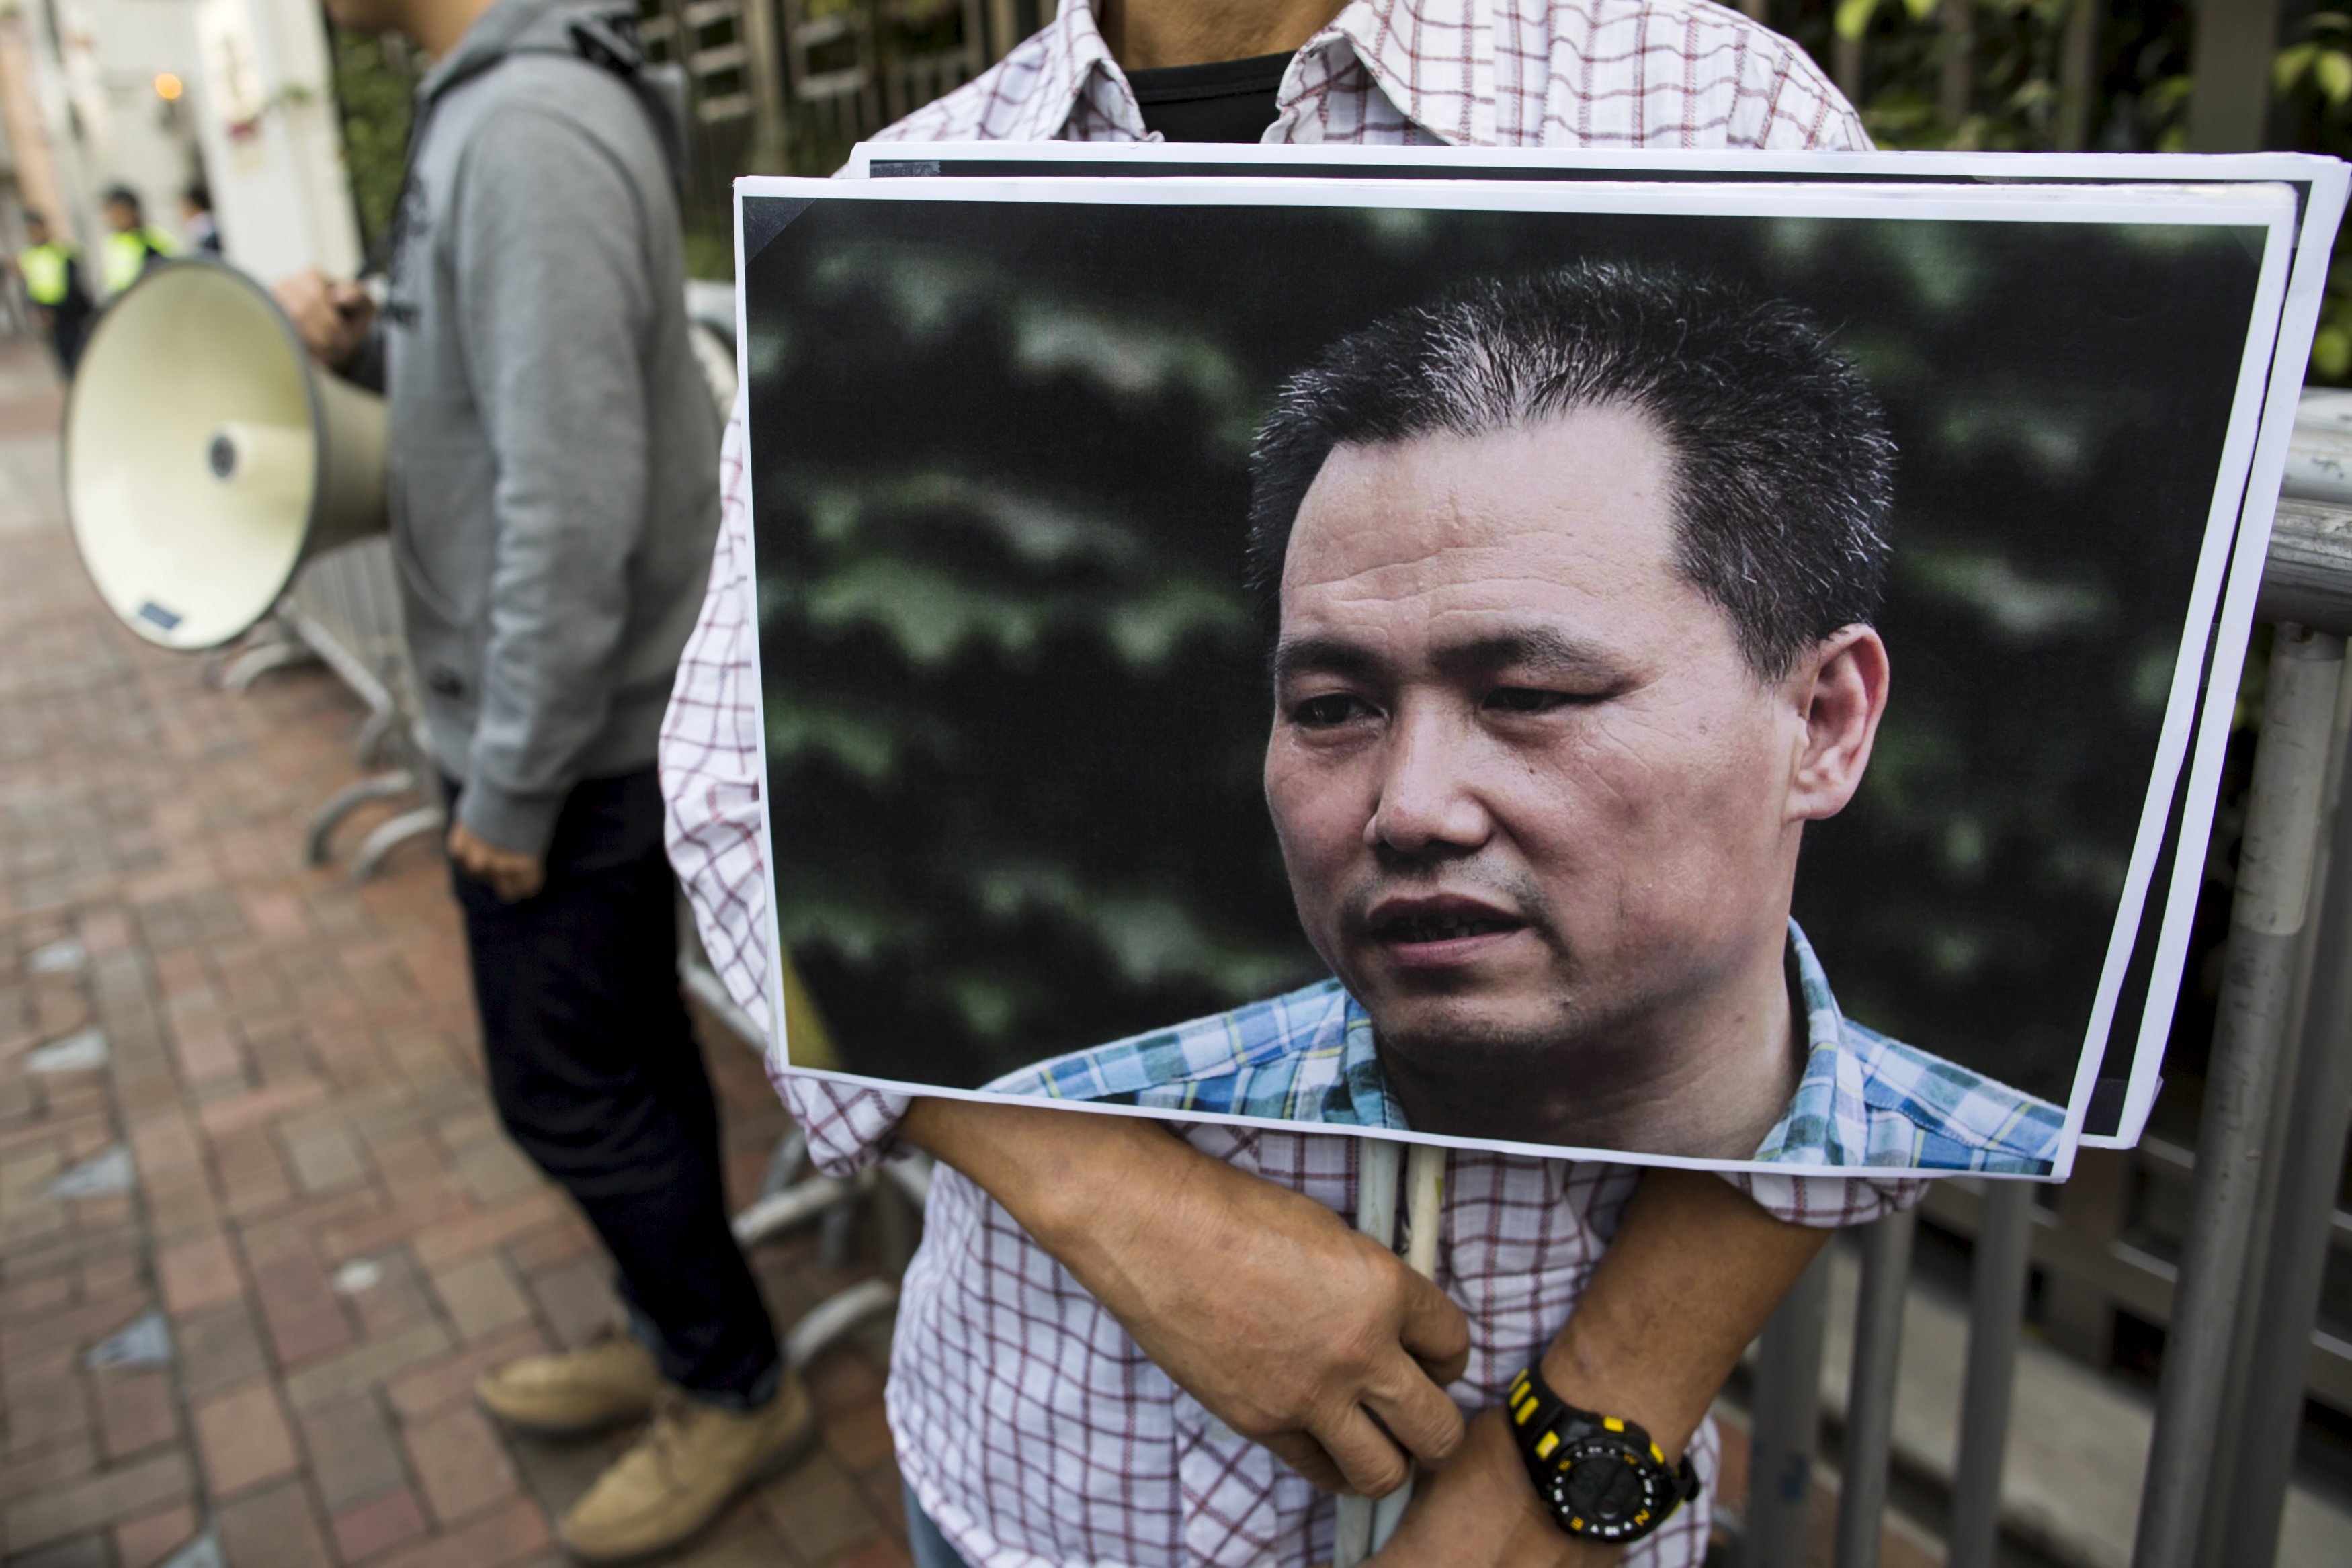 A pro-democracy protester holds a portrait of Chinese human rights lawyer Pu Zhiqiang, demanding his release during a demonstration, outside the Chinese liaison office in Hong Kong, China December 15, 2015. REUTERS/Tyrone Siu